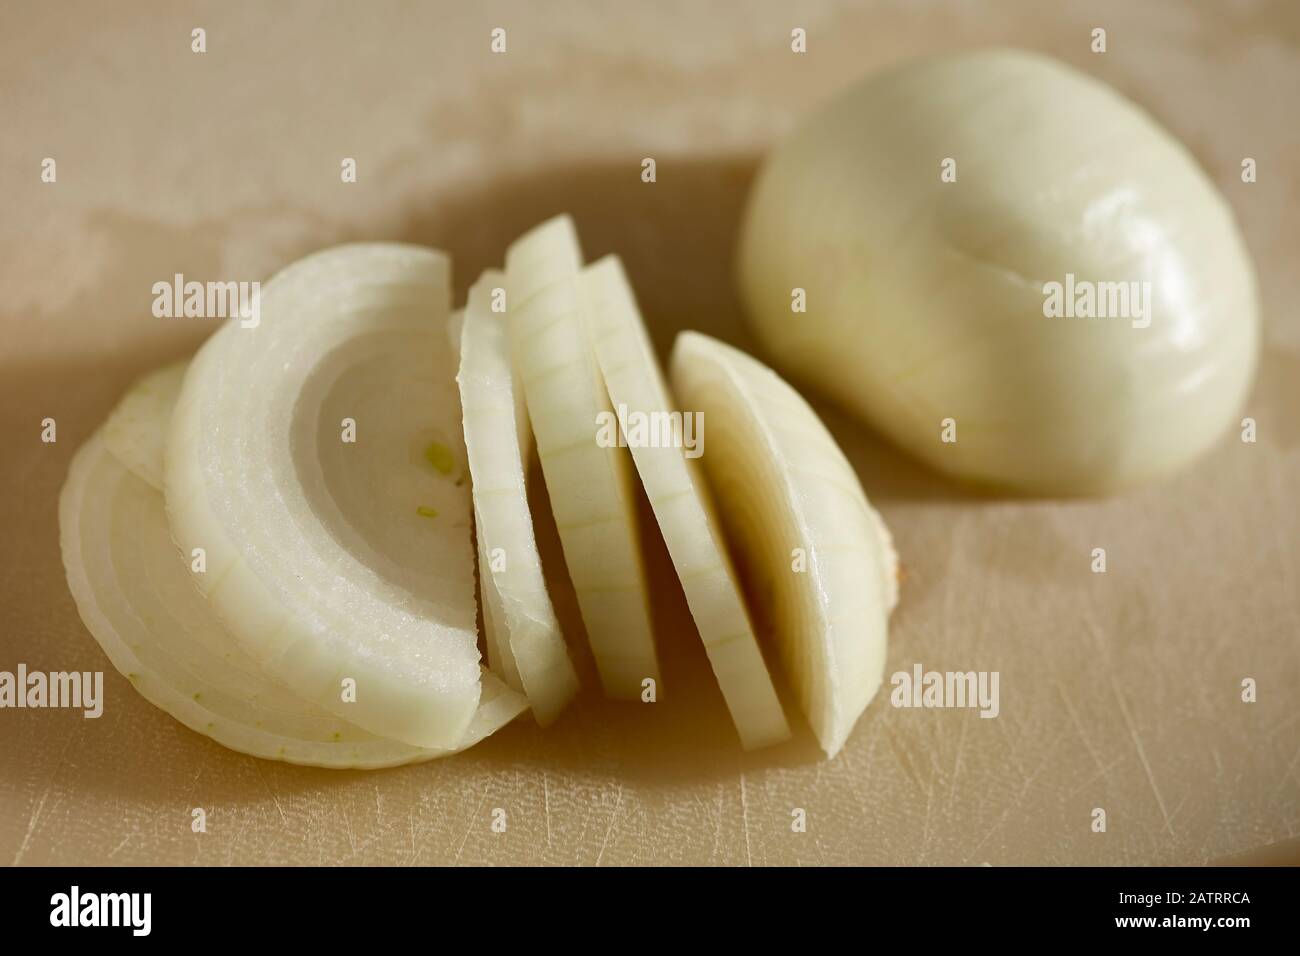 A peeled and sliced yellow onion Stock Photo